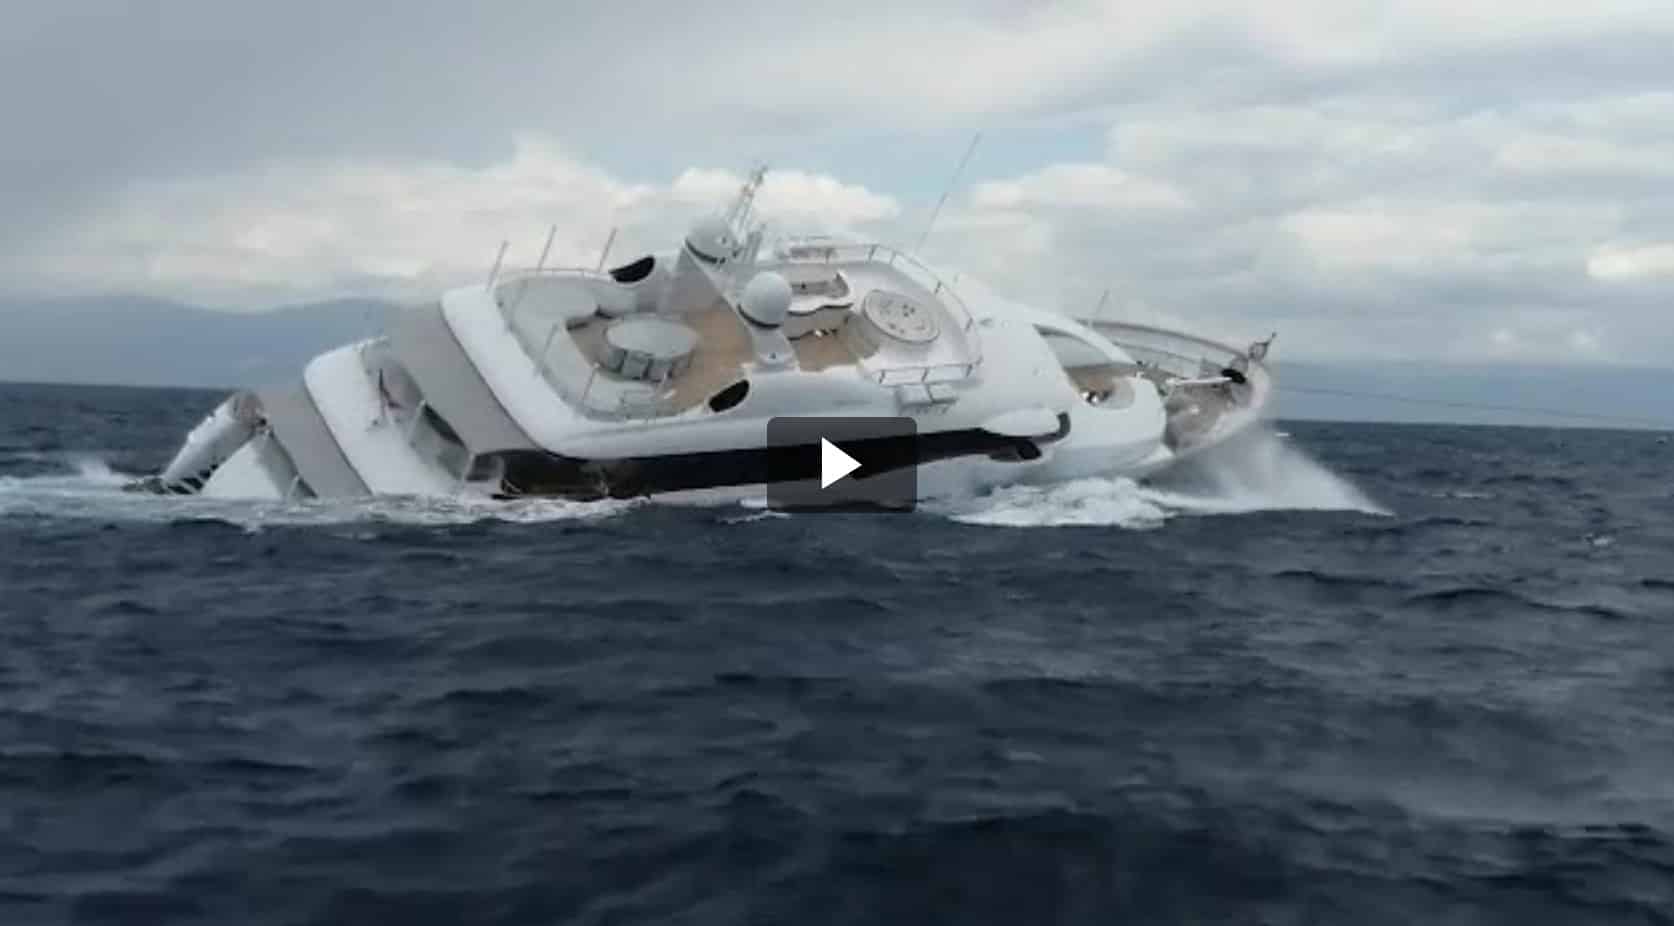 VIDEO: 39m Luxury Yacht Sinks Off The Coast Of Italy